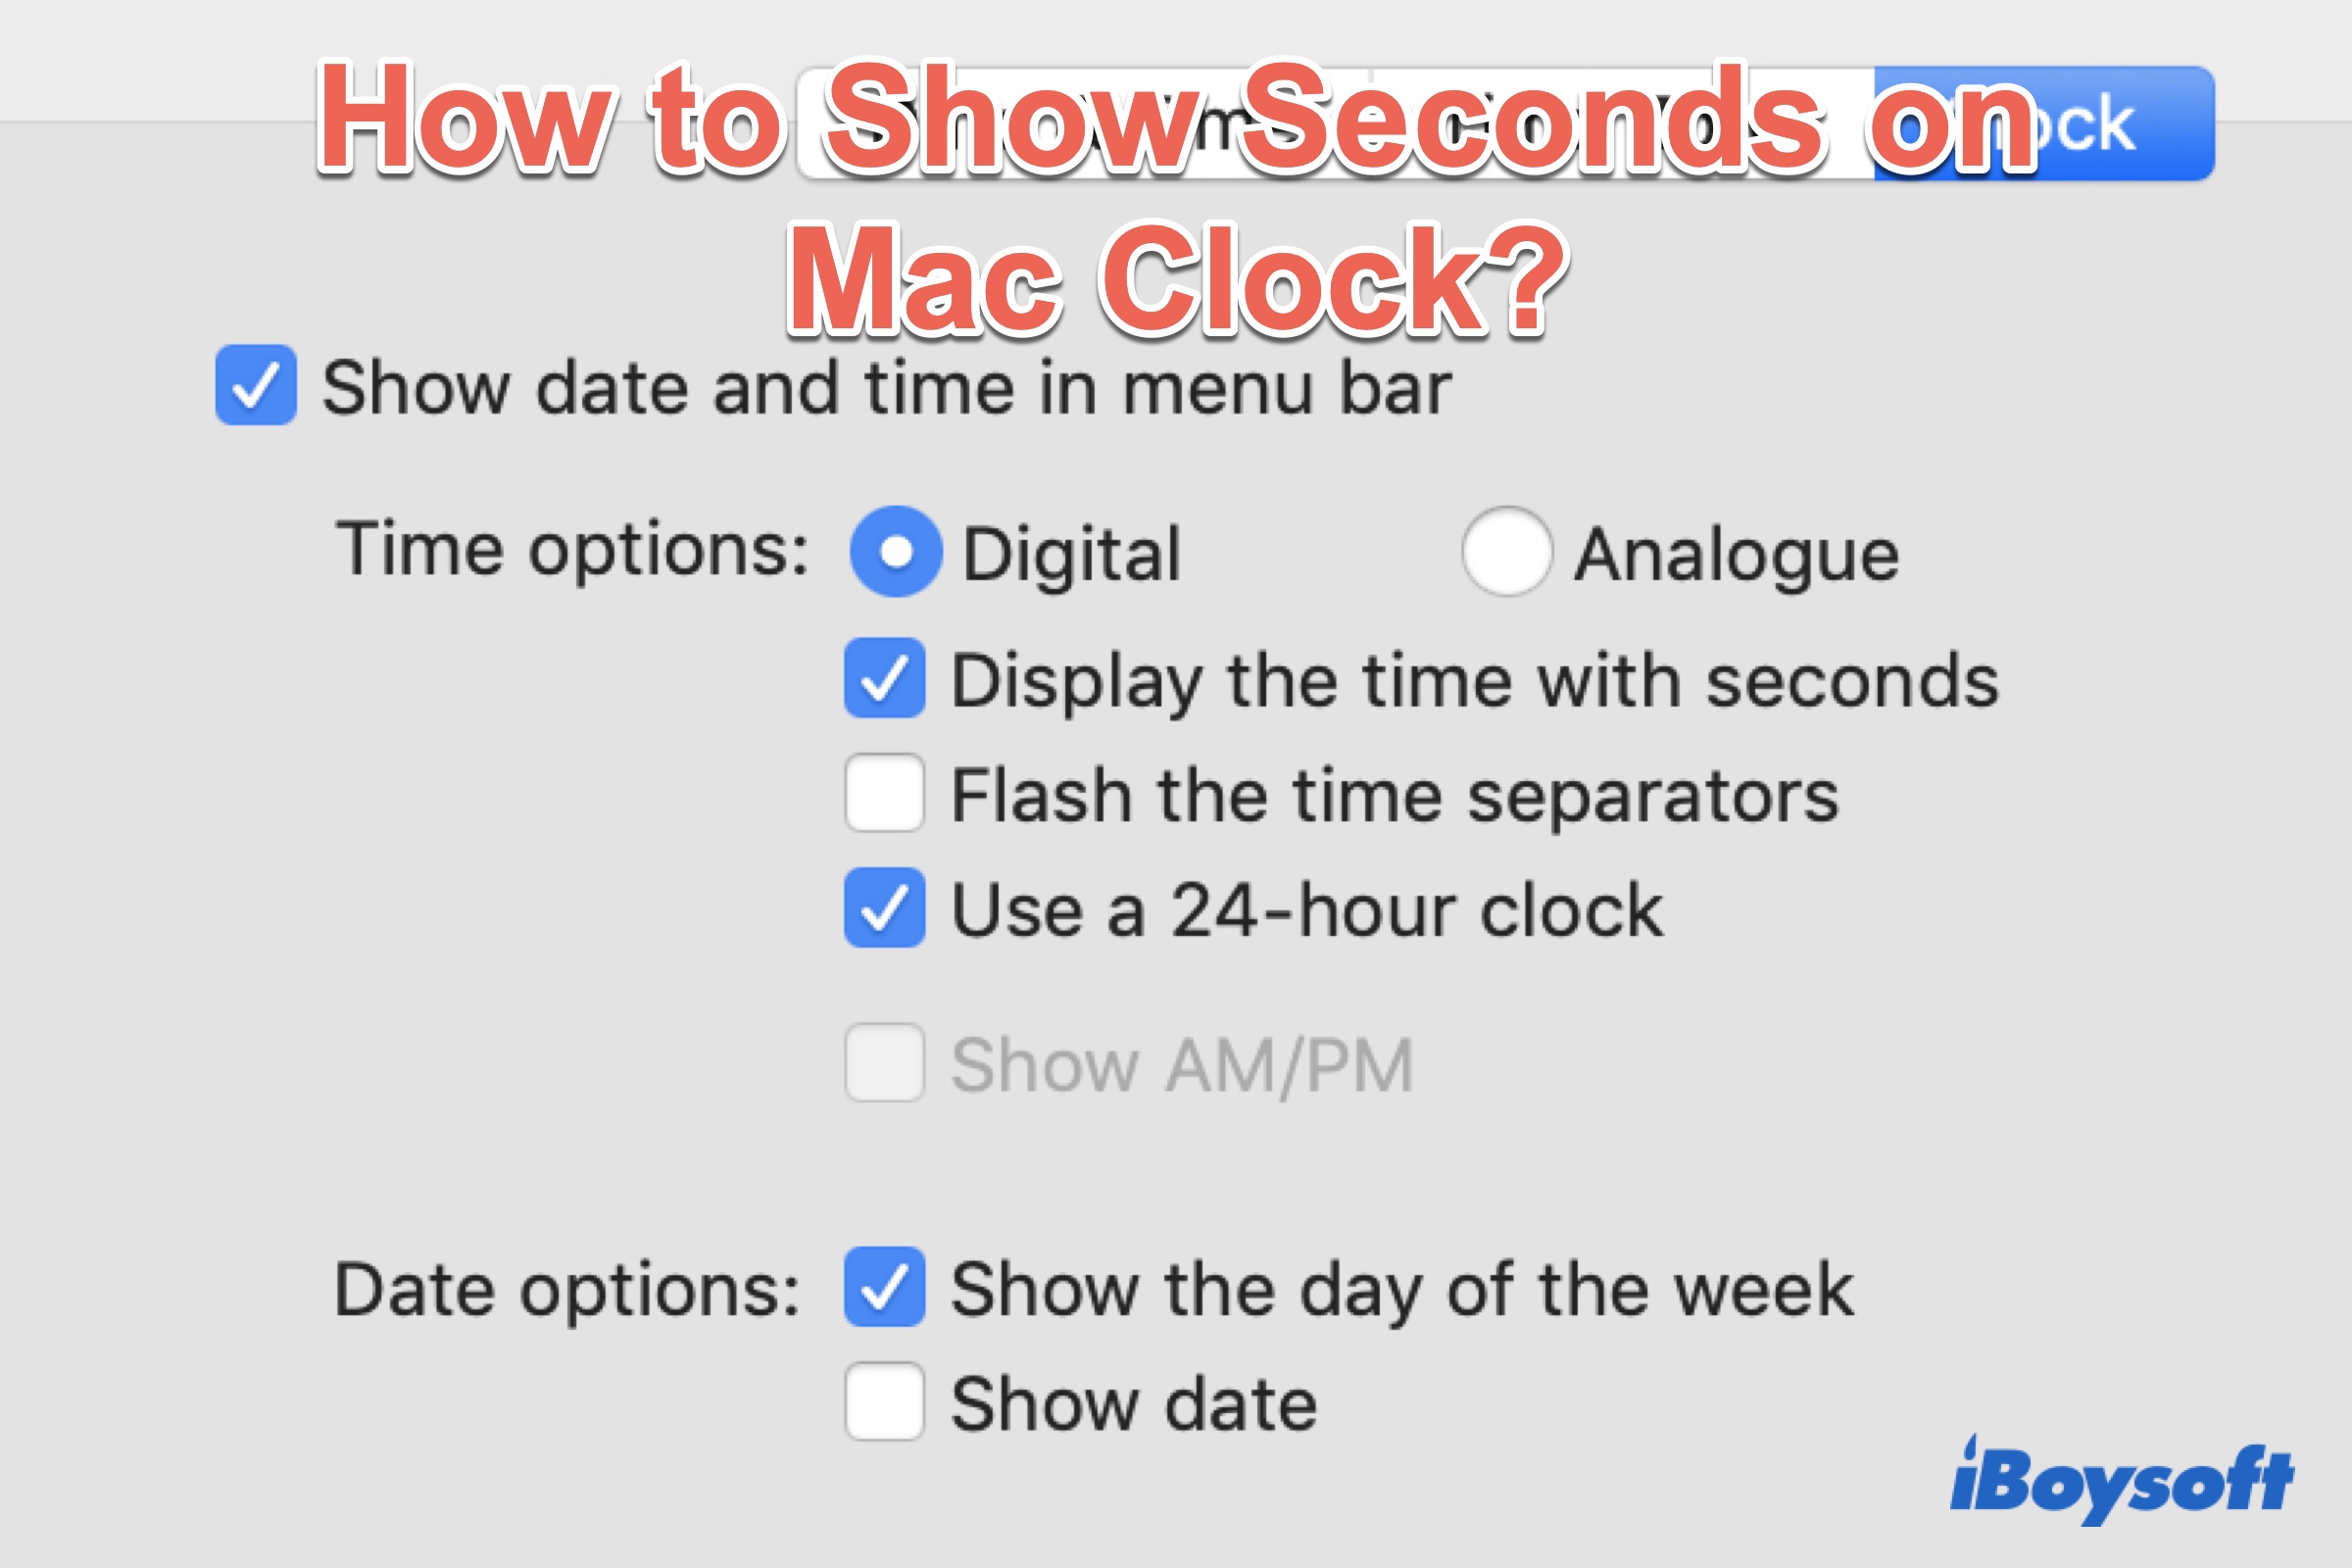 how to show seconds on Mac clock